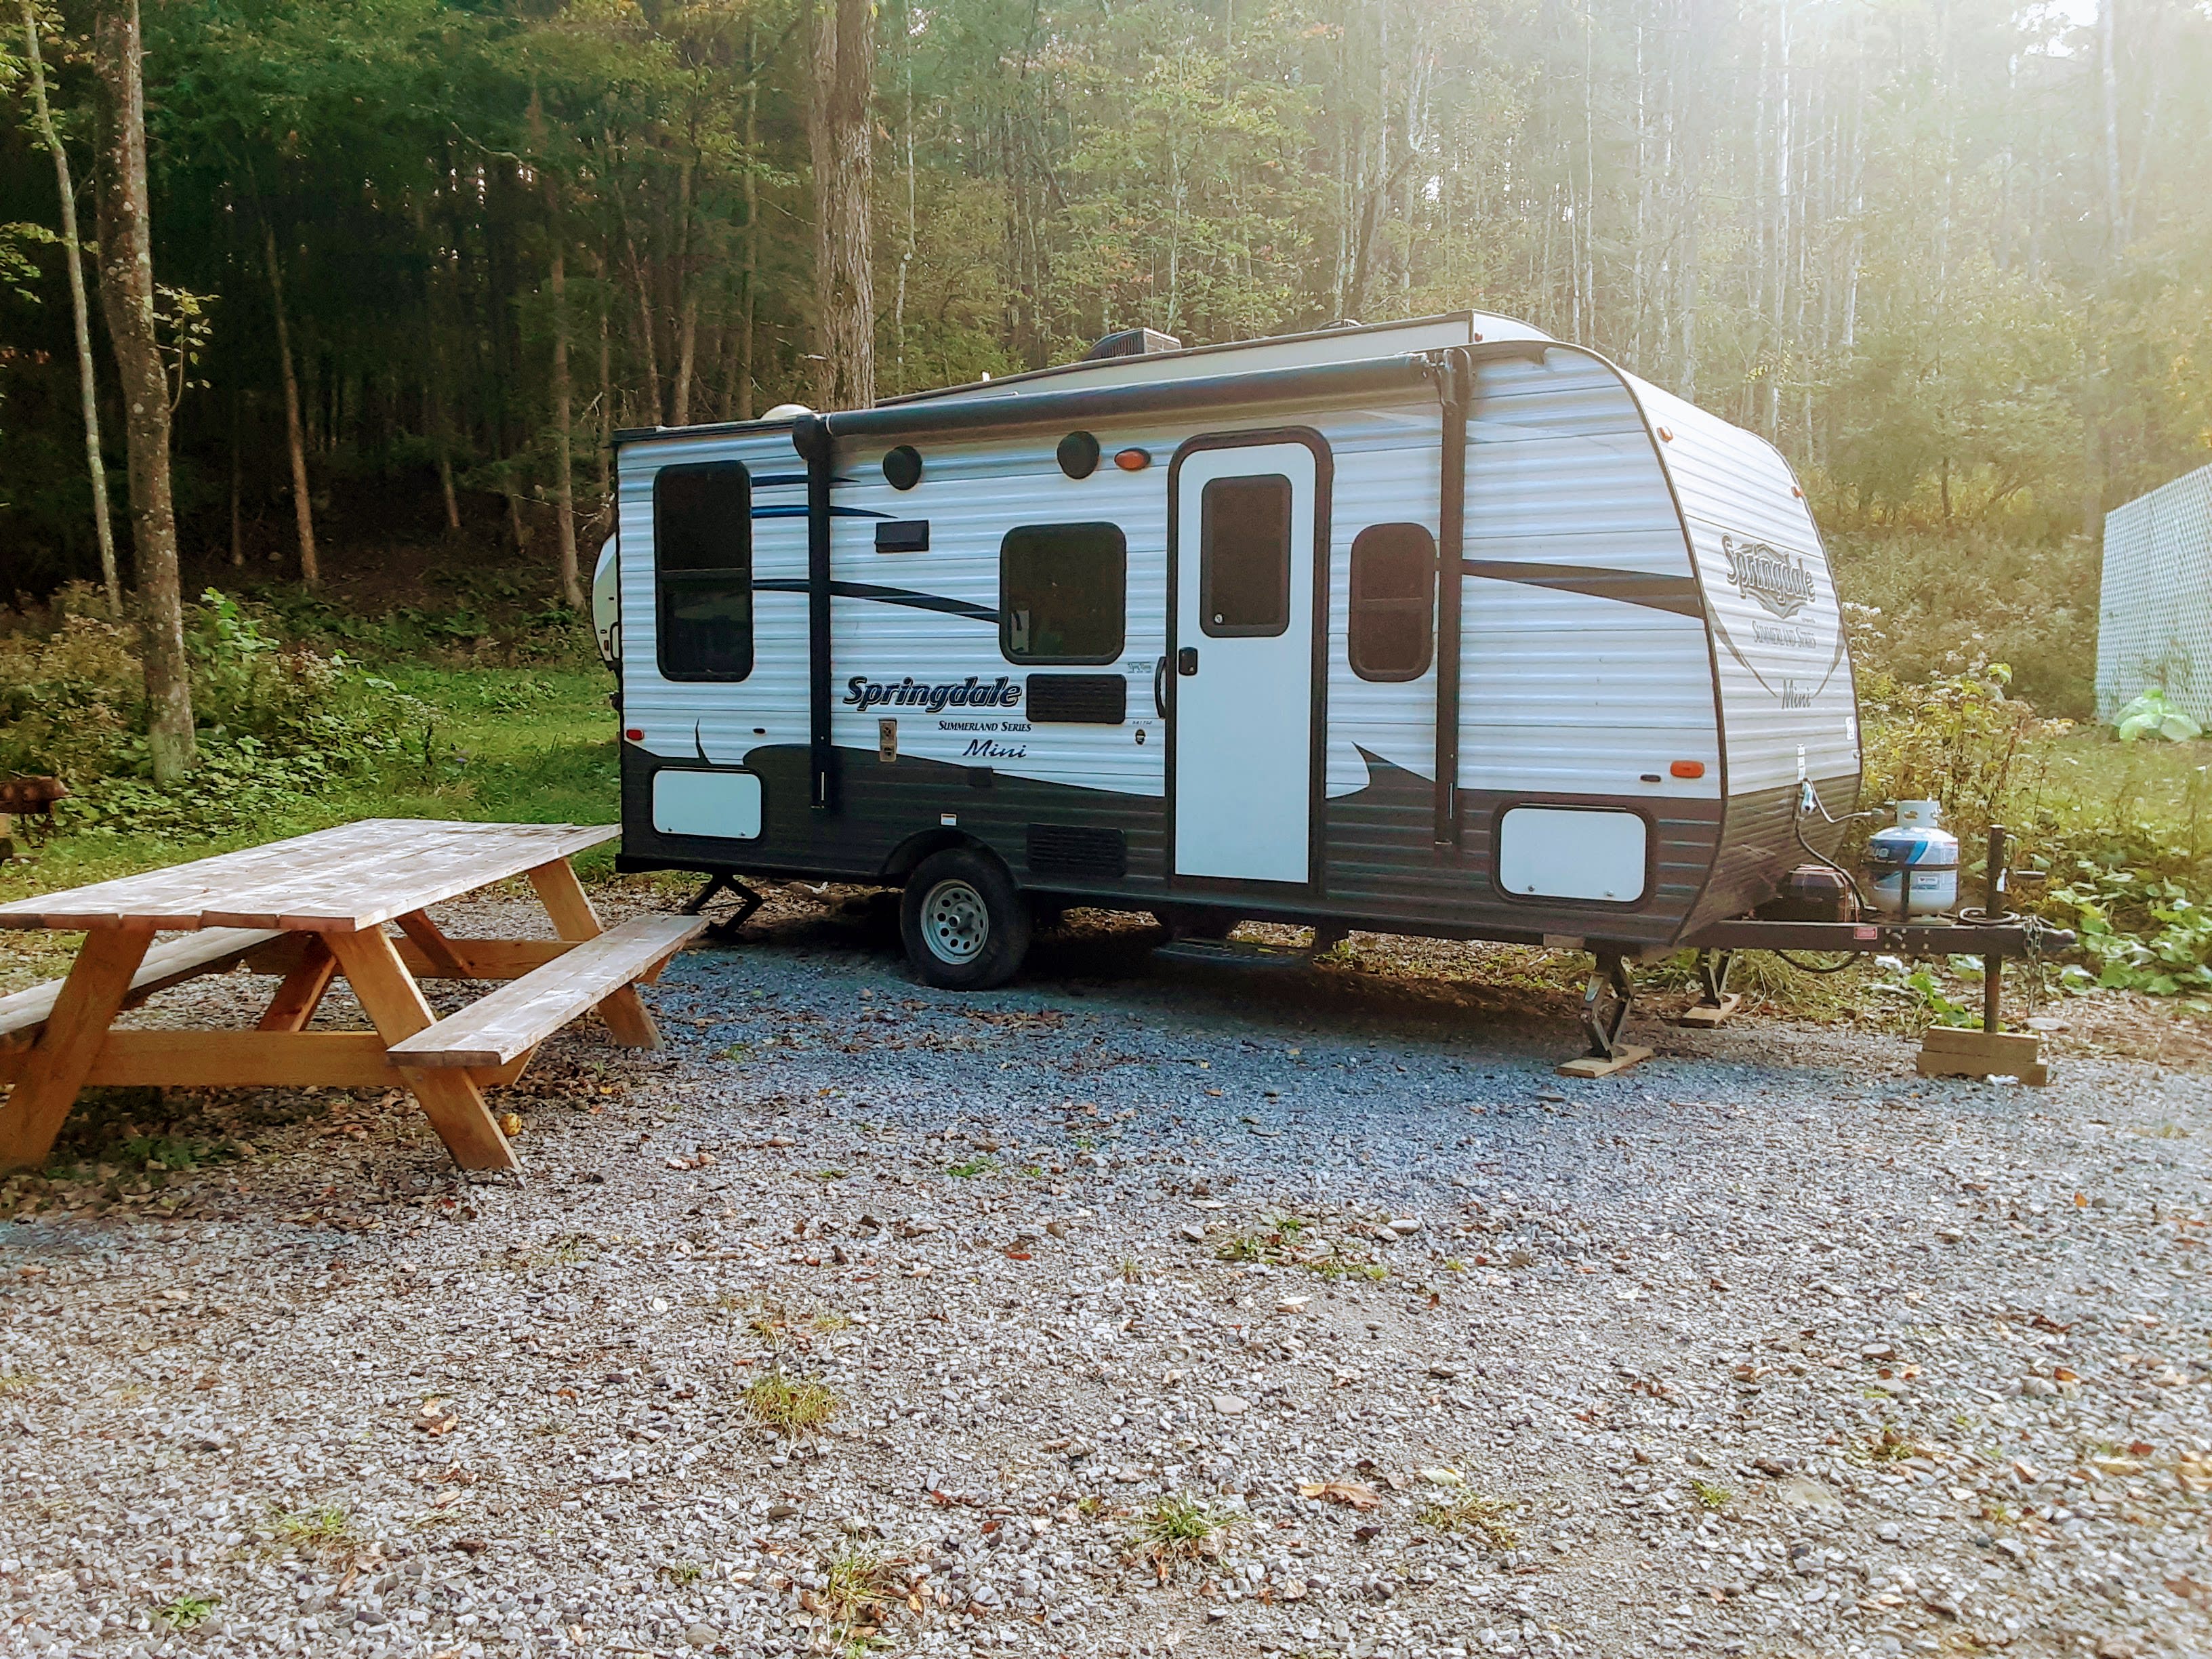 View of RV Camper and picnic table.